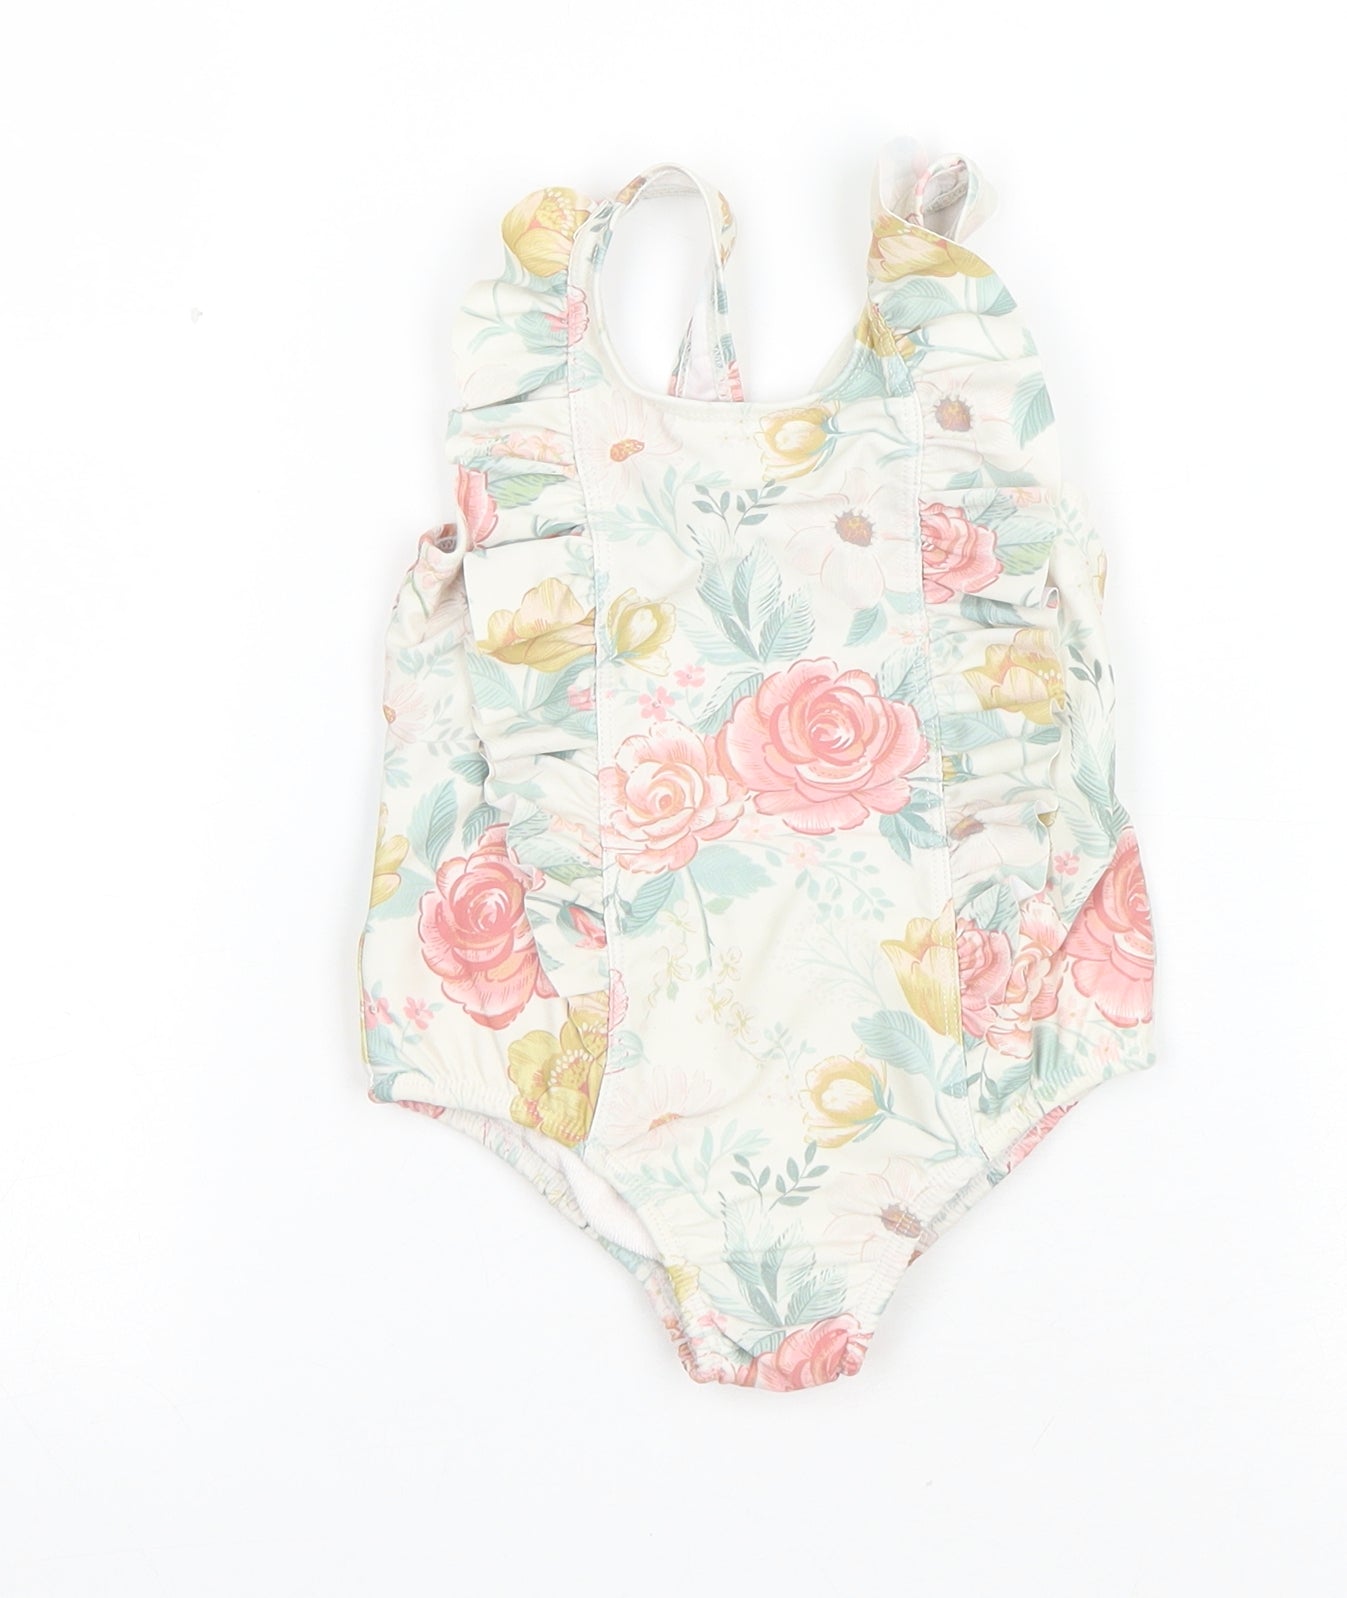 TU Baby Multicoloured Floral Polyester Leotard Outfit/Set Size 9-12 Months Pullover - Swimsuit